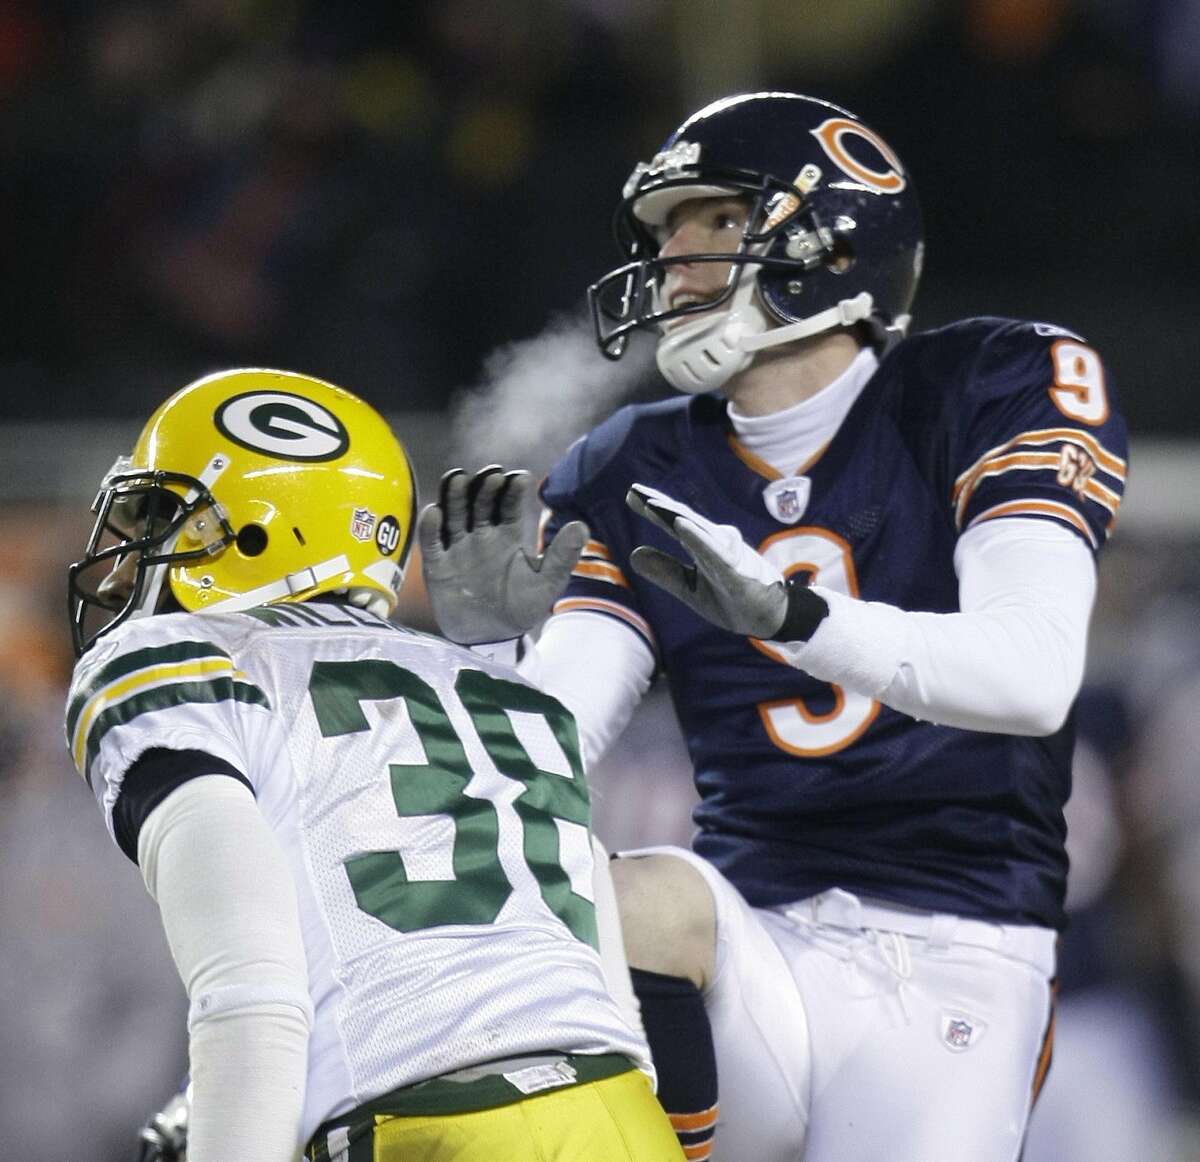 Chicago Bears place kicker Robbie Gould, right, watches his 38-yard game-winning field goal with Green Bay Packers cornerback Tramon Williams, left, in overtime of their NFL football game at Soldier Field in Chicago Monday, Dec. 22, 2008. (AP Photo/Nam Y. Huh)